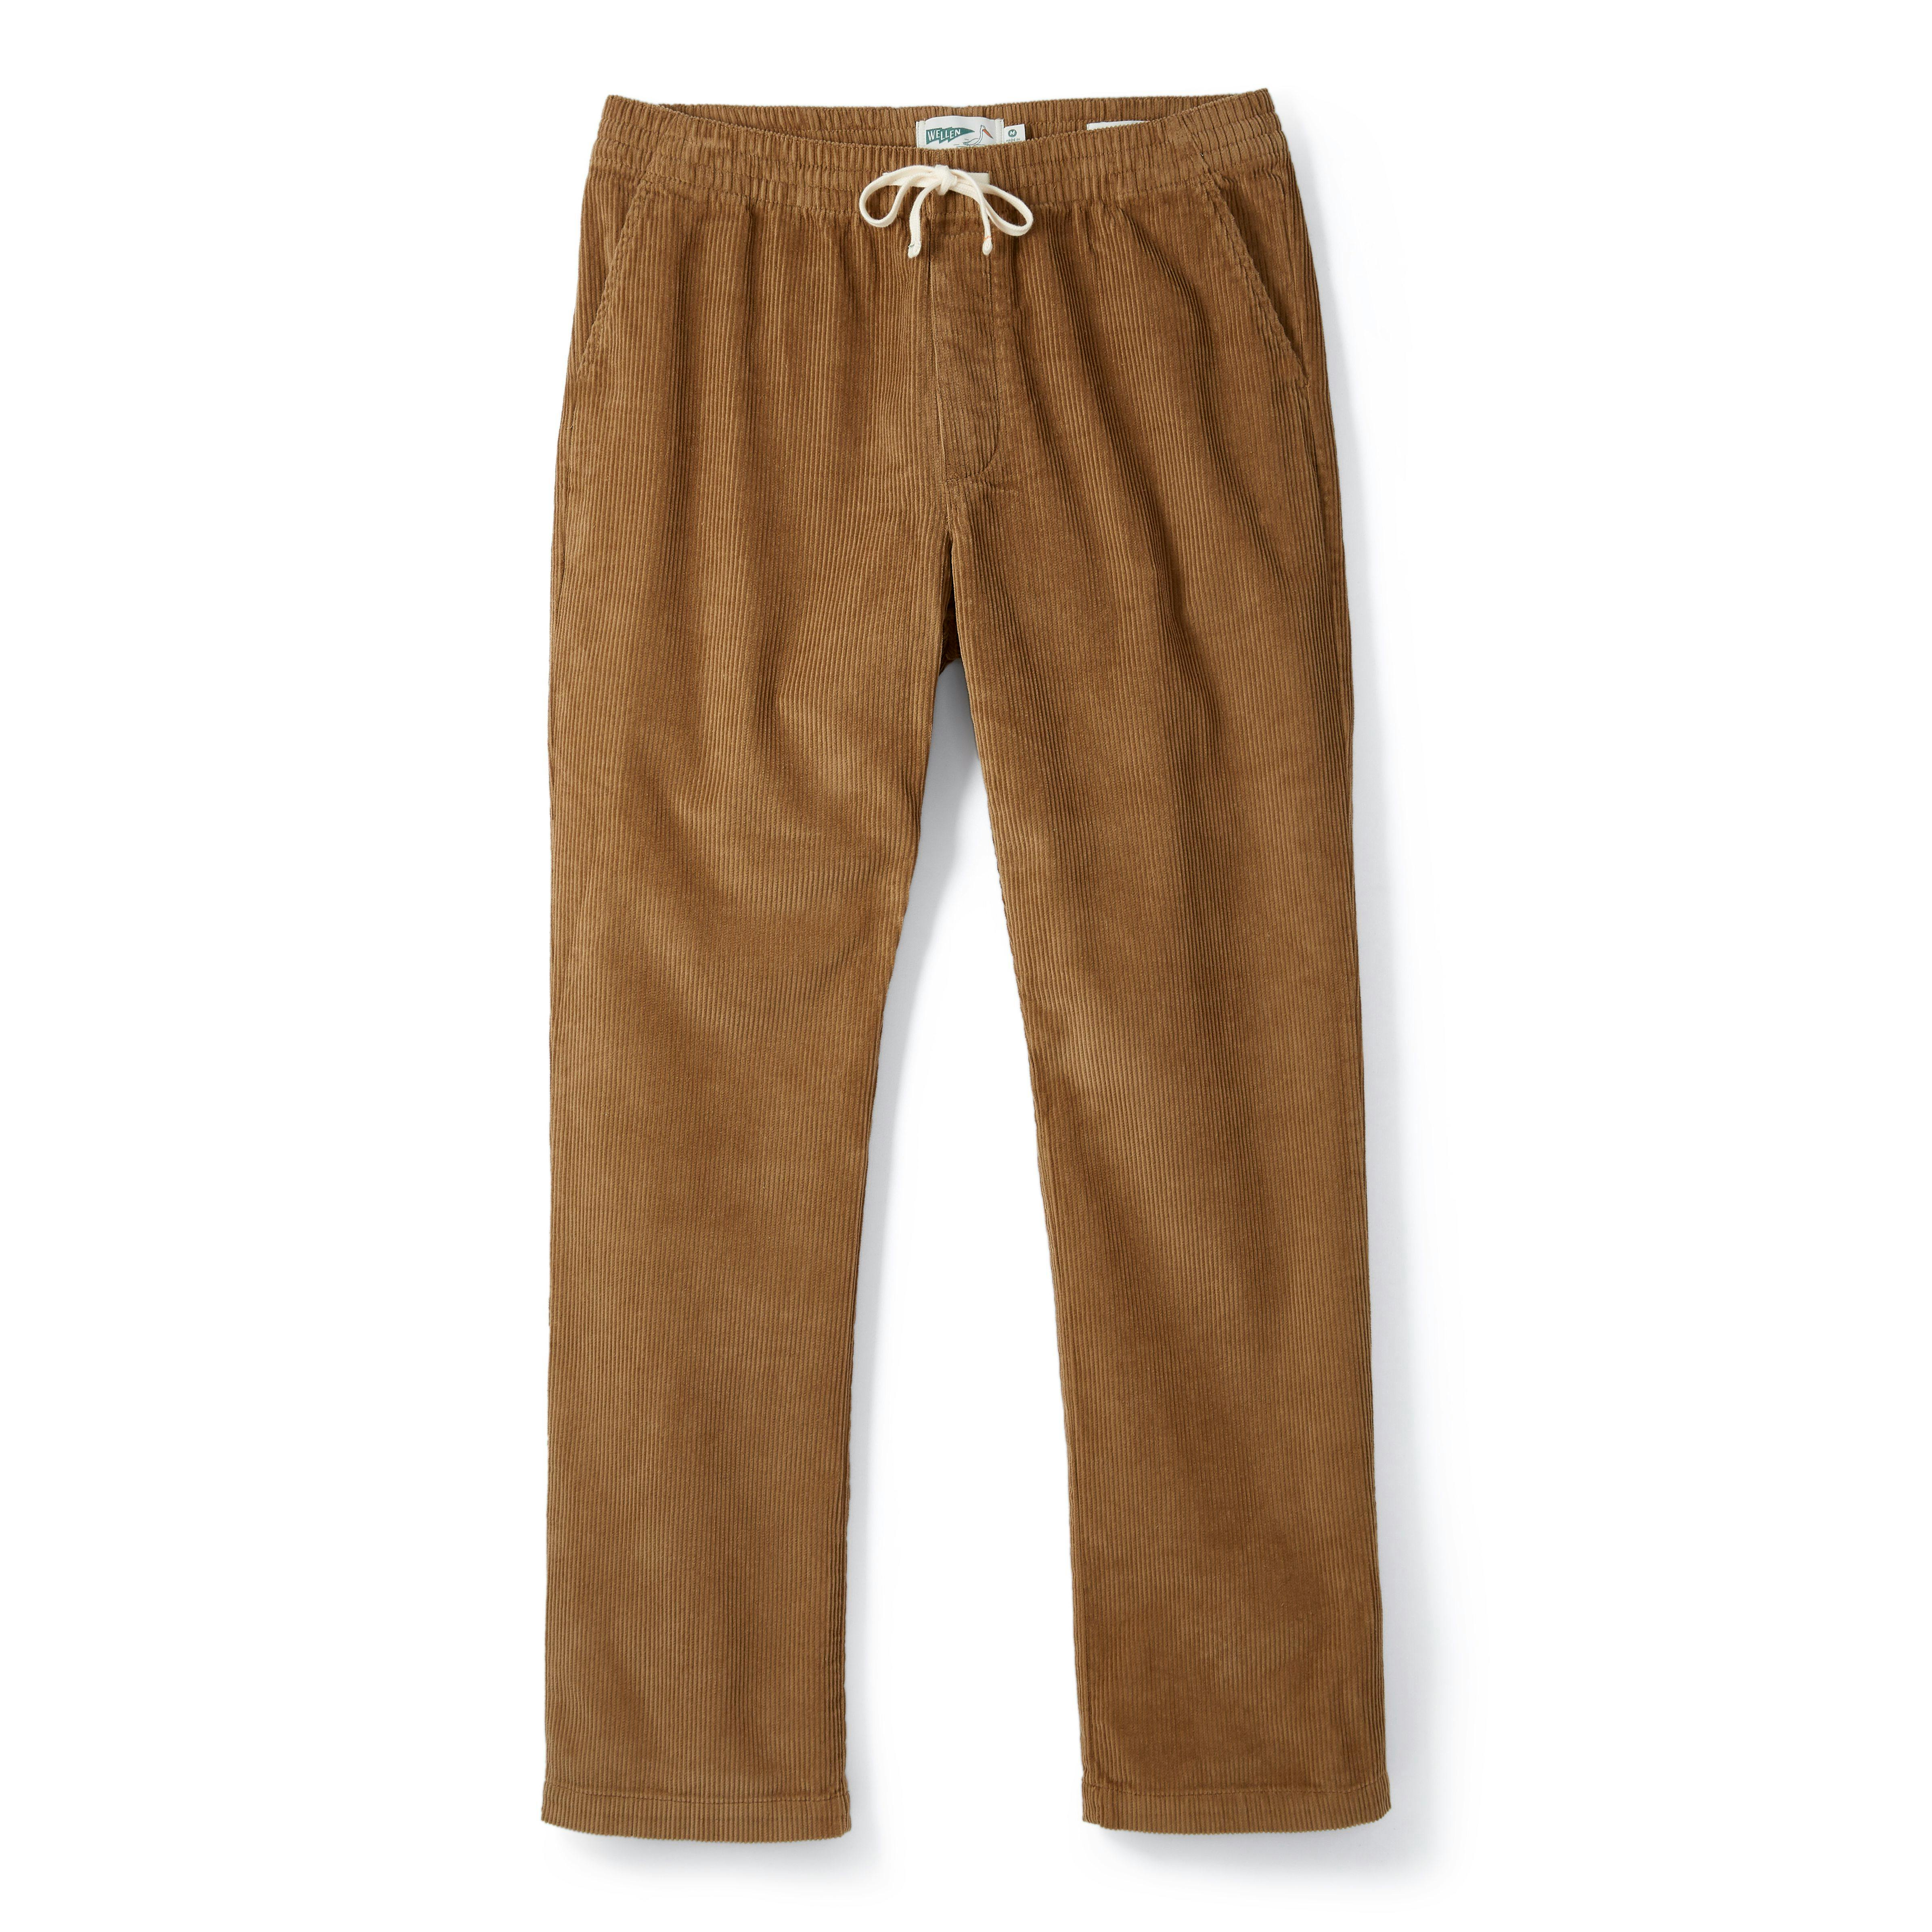 Perfect Fit Cord Pants - Infashion